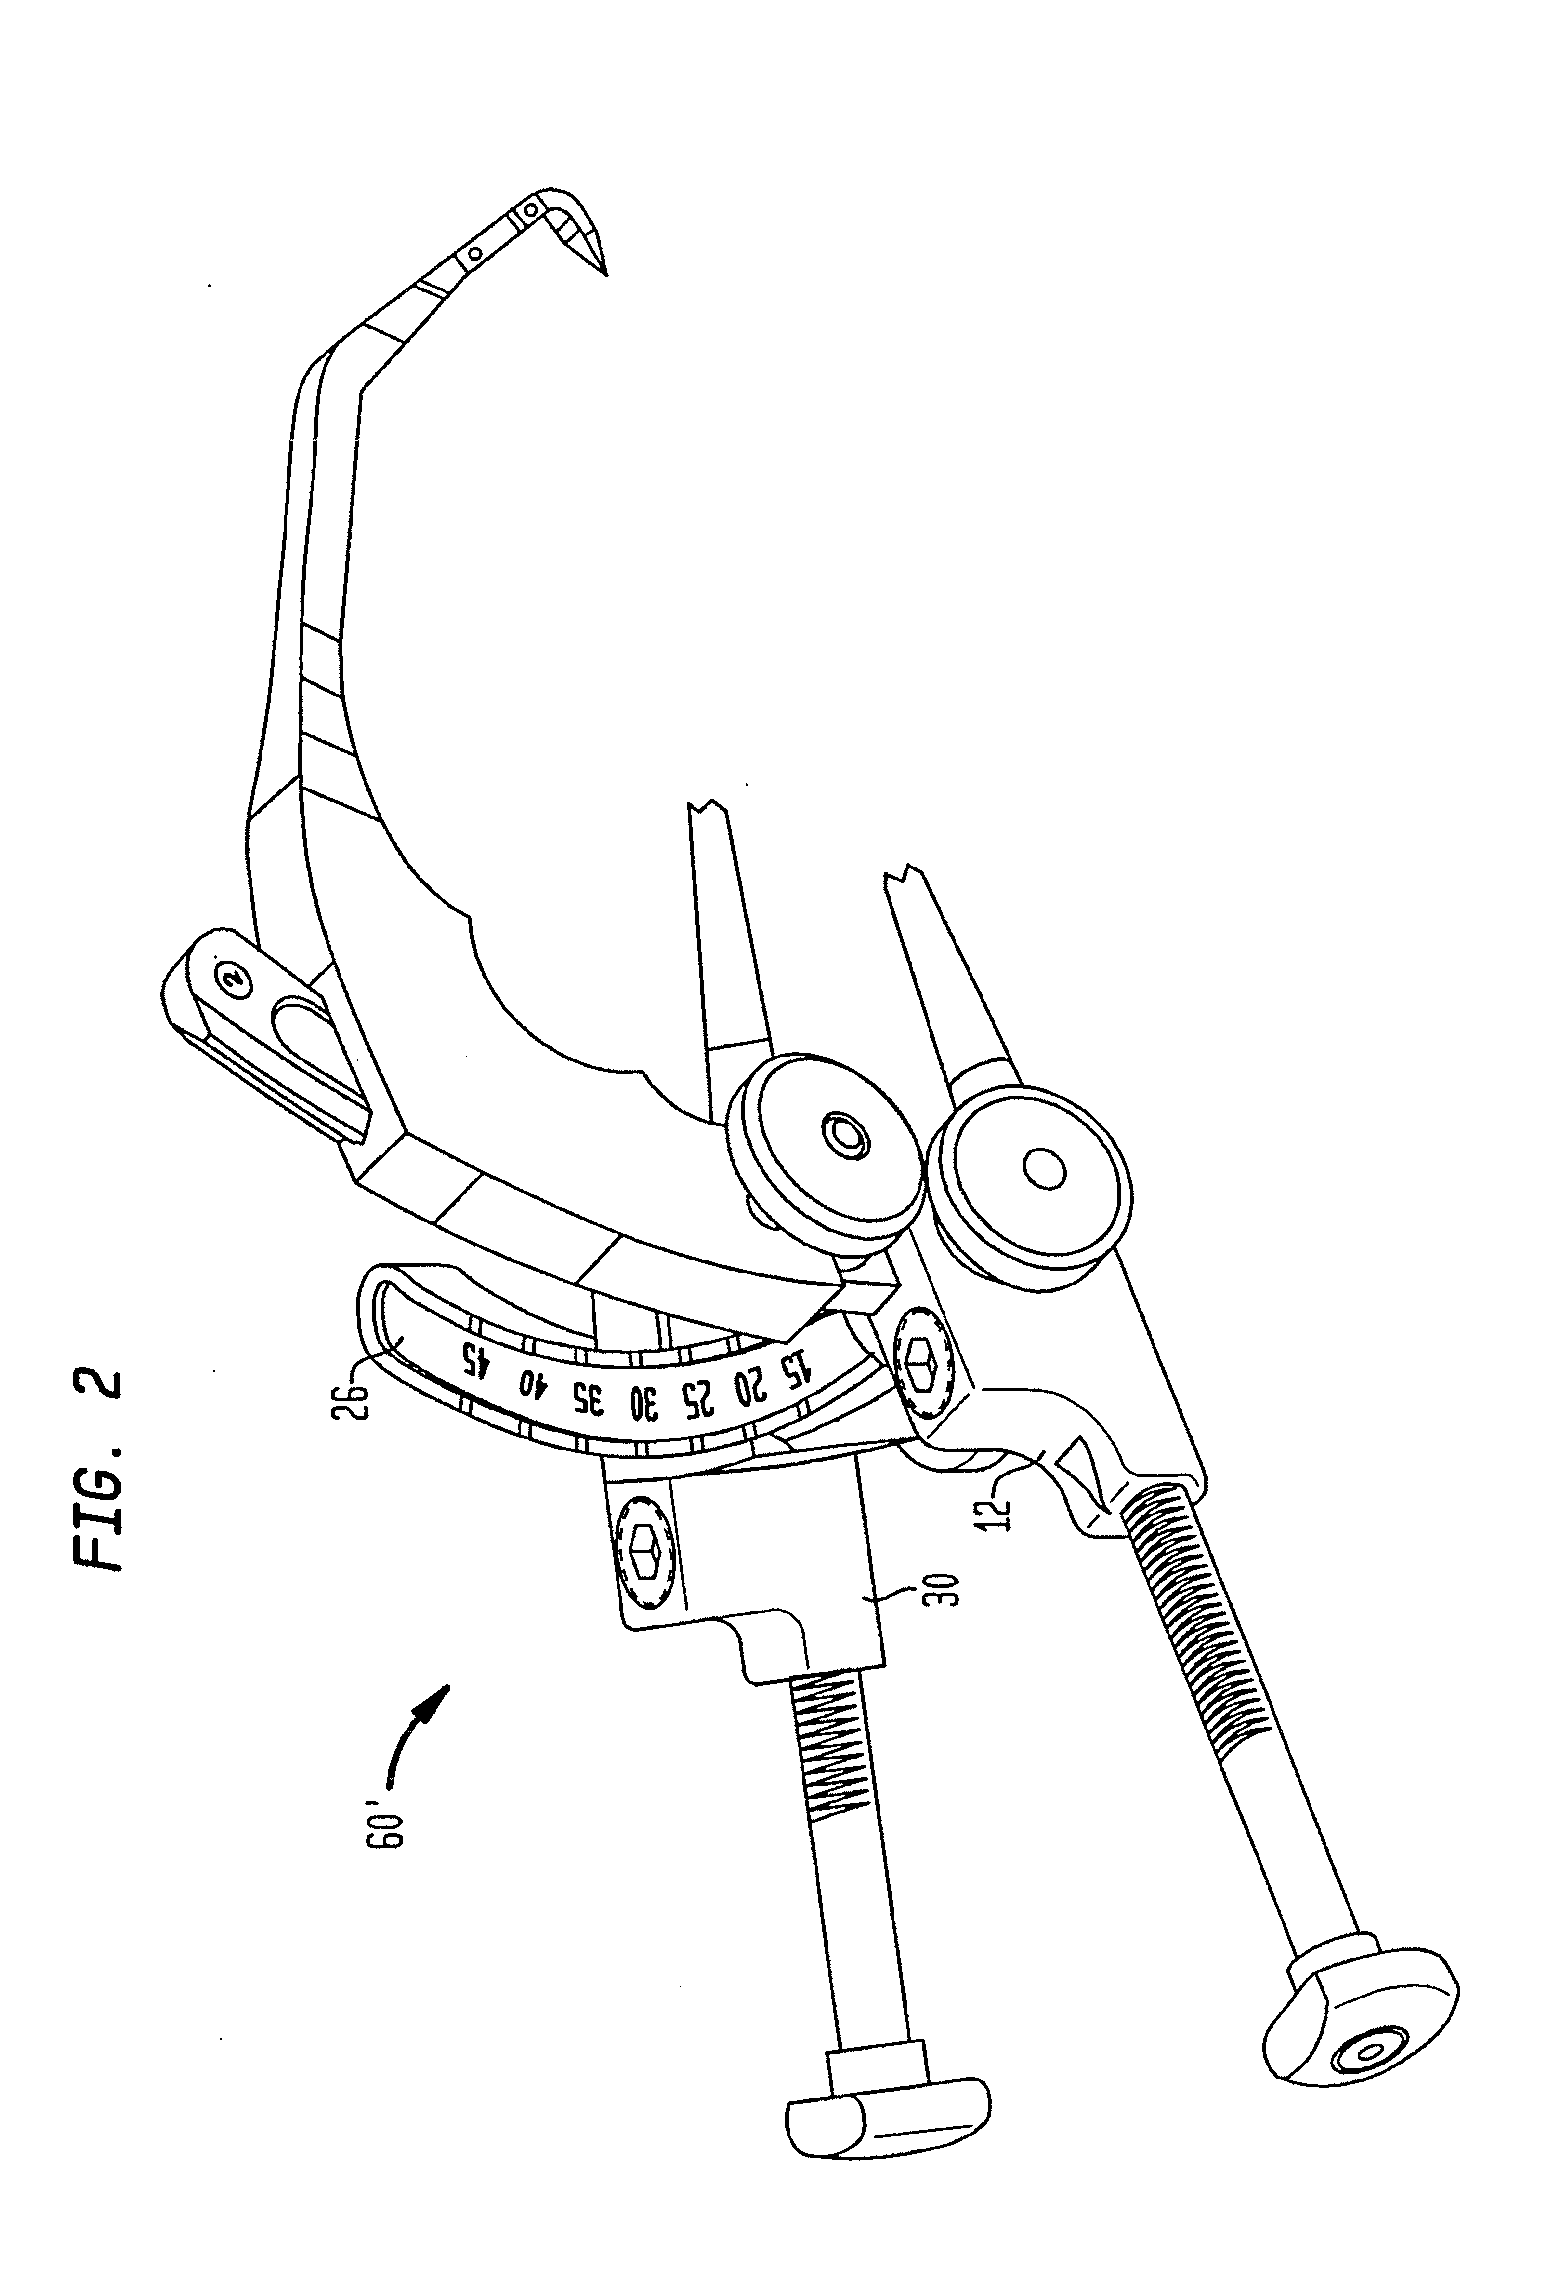 Methods and devices for ligament repair